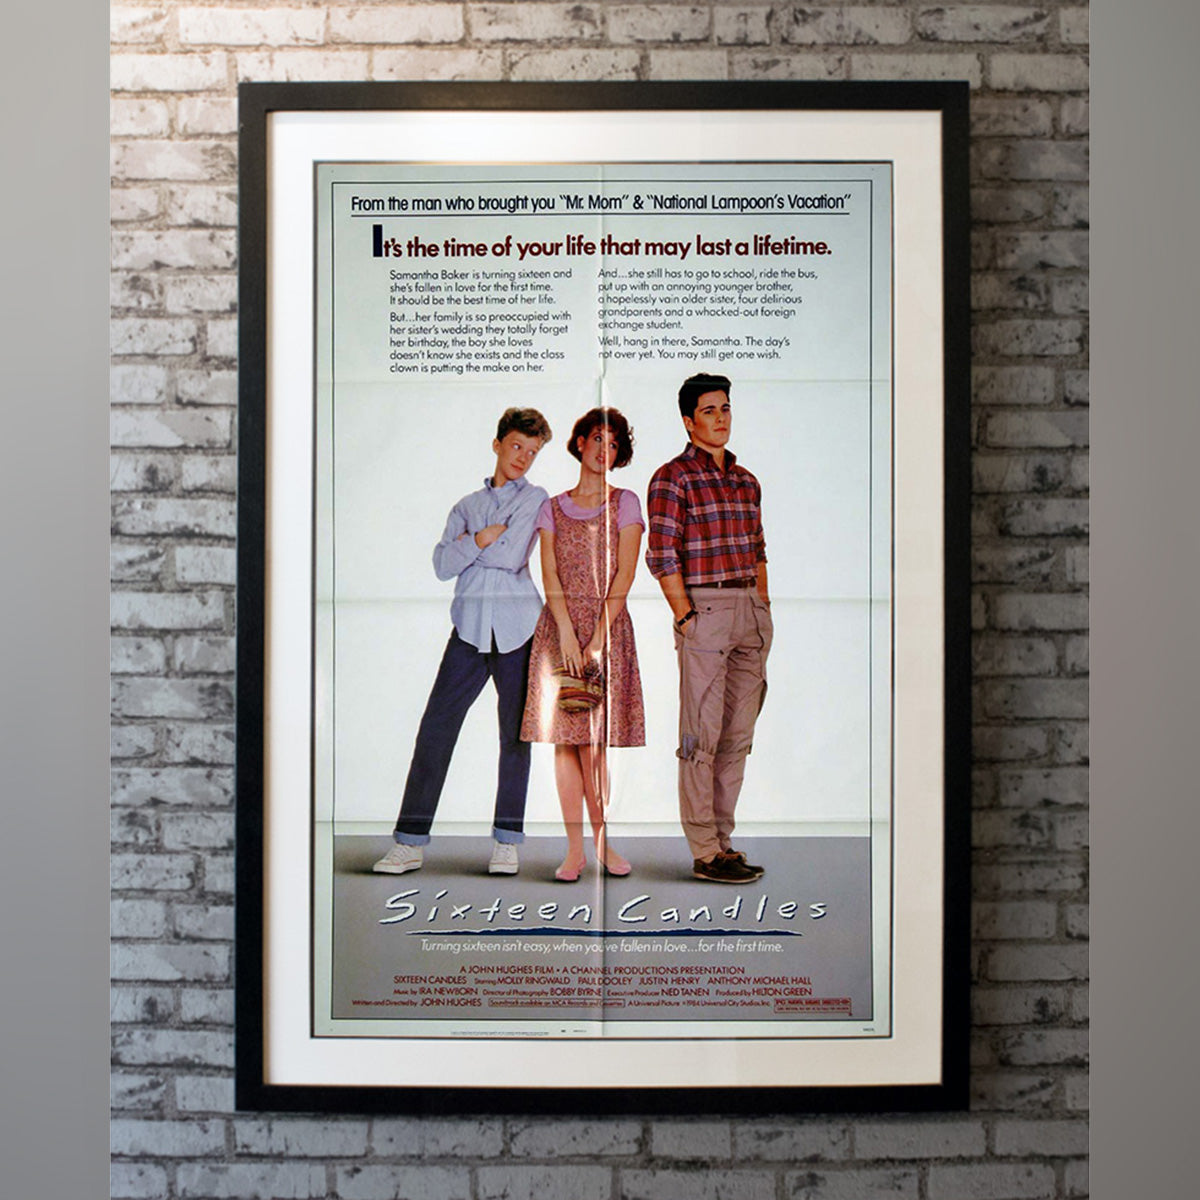 Original Movie Poster of Sixteen Candles (1984)